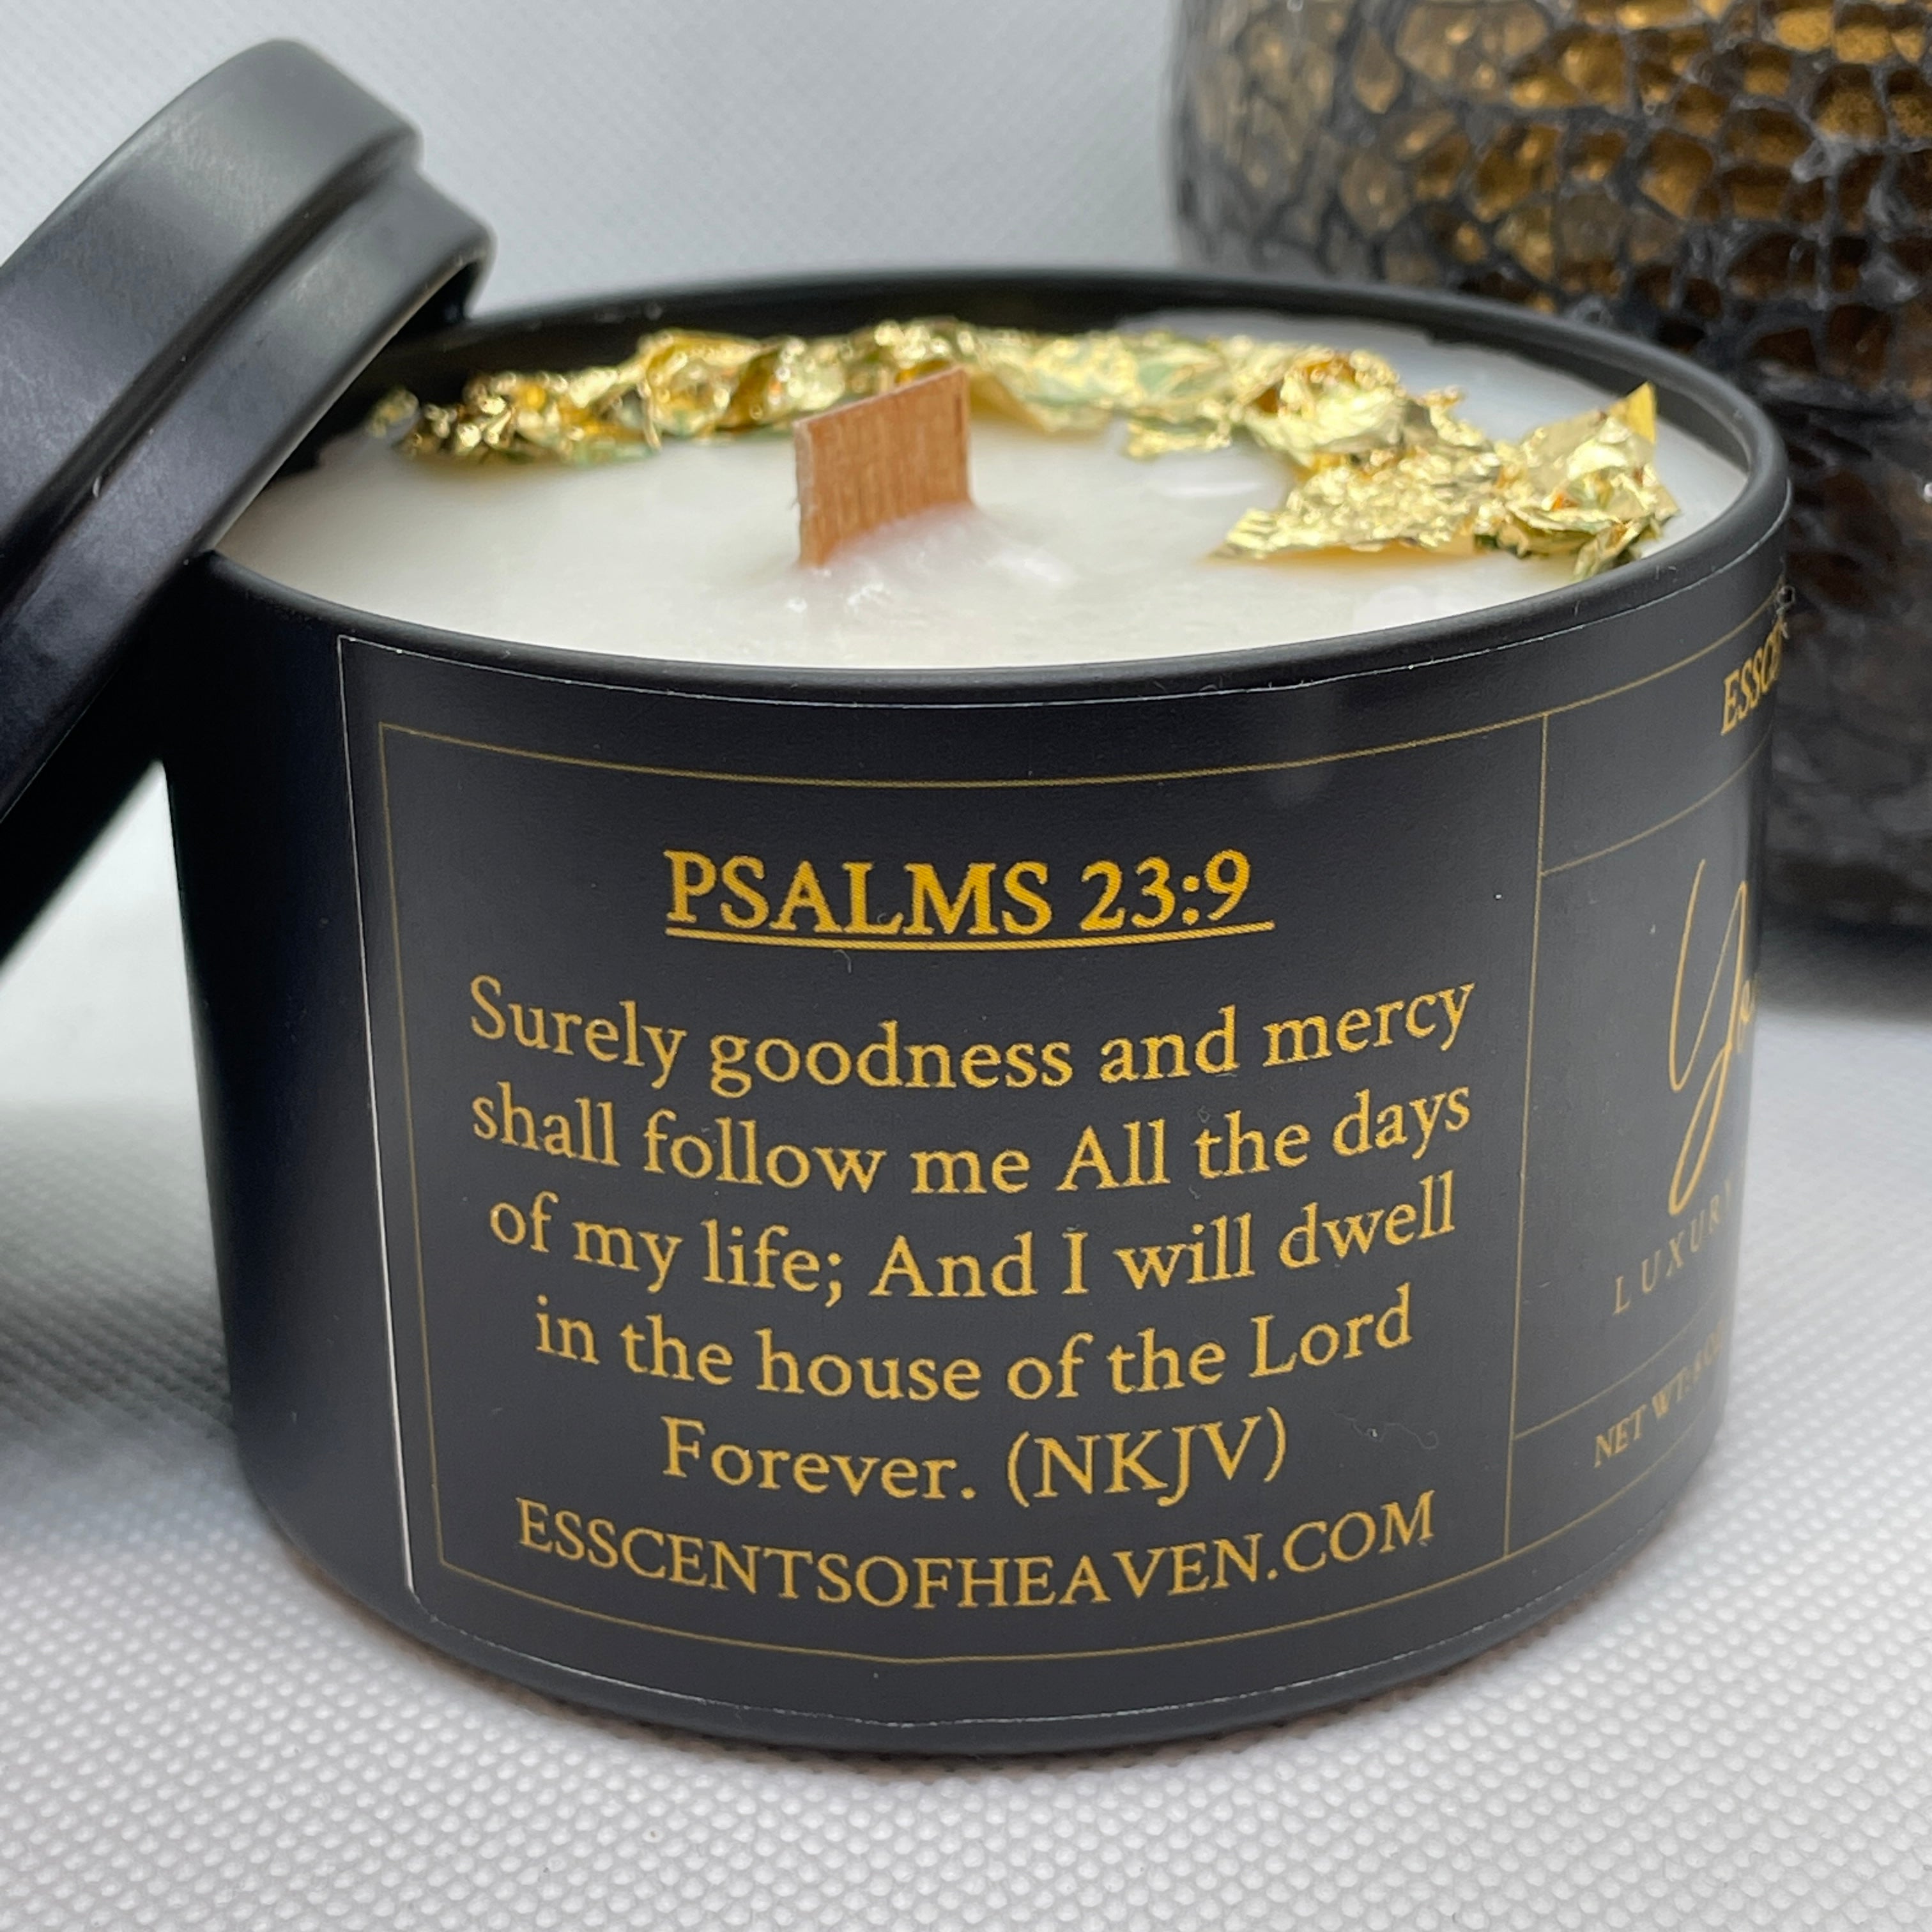 “Forever Yours” Gold Leaf Candle